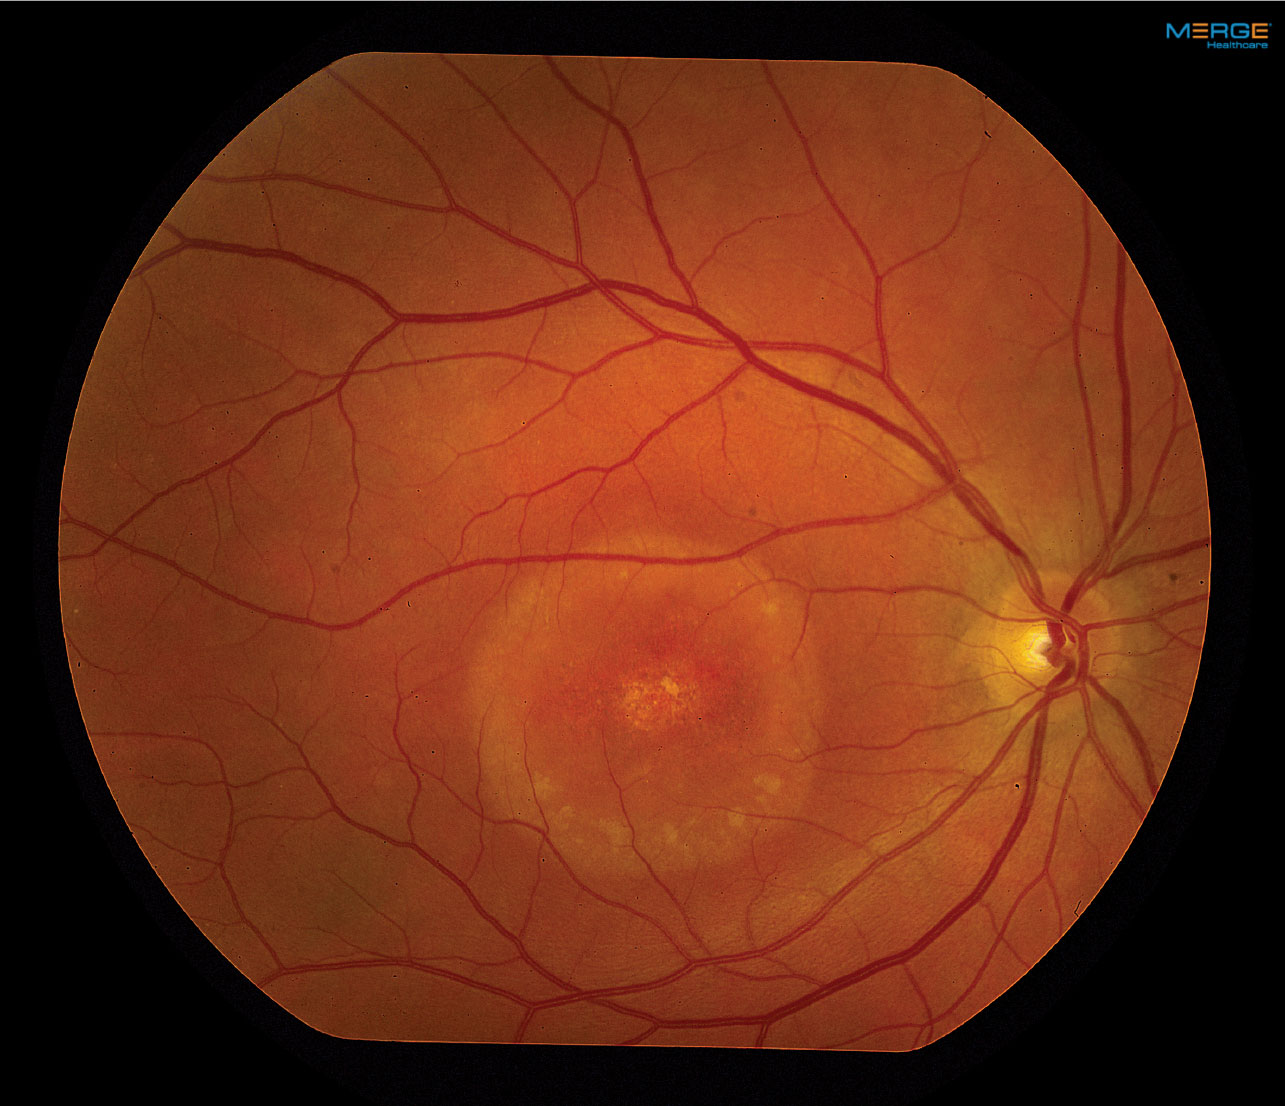 Our patient’s fundus photos reveal changes in the right macula. 